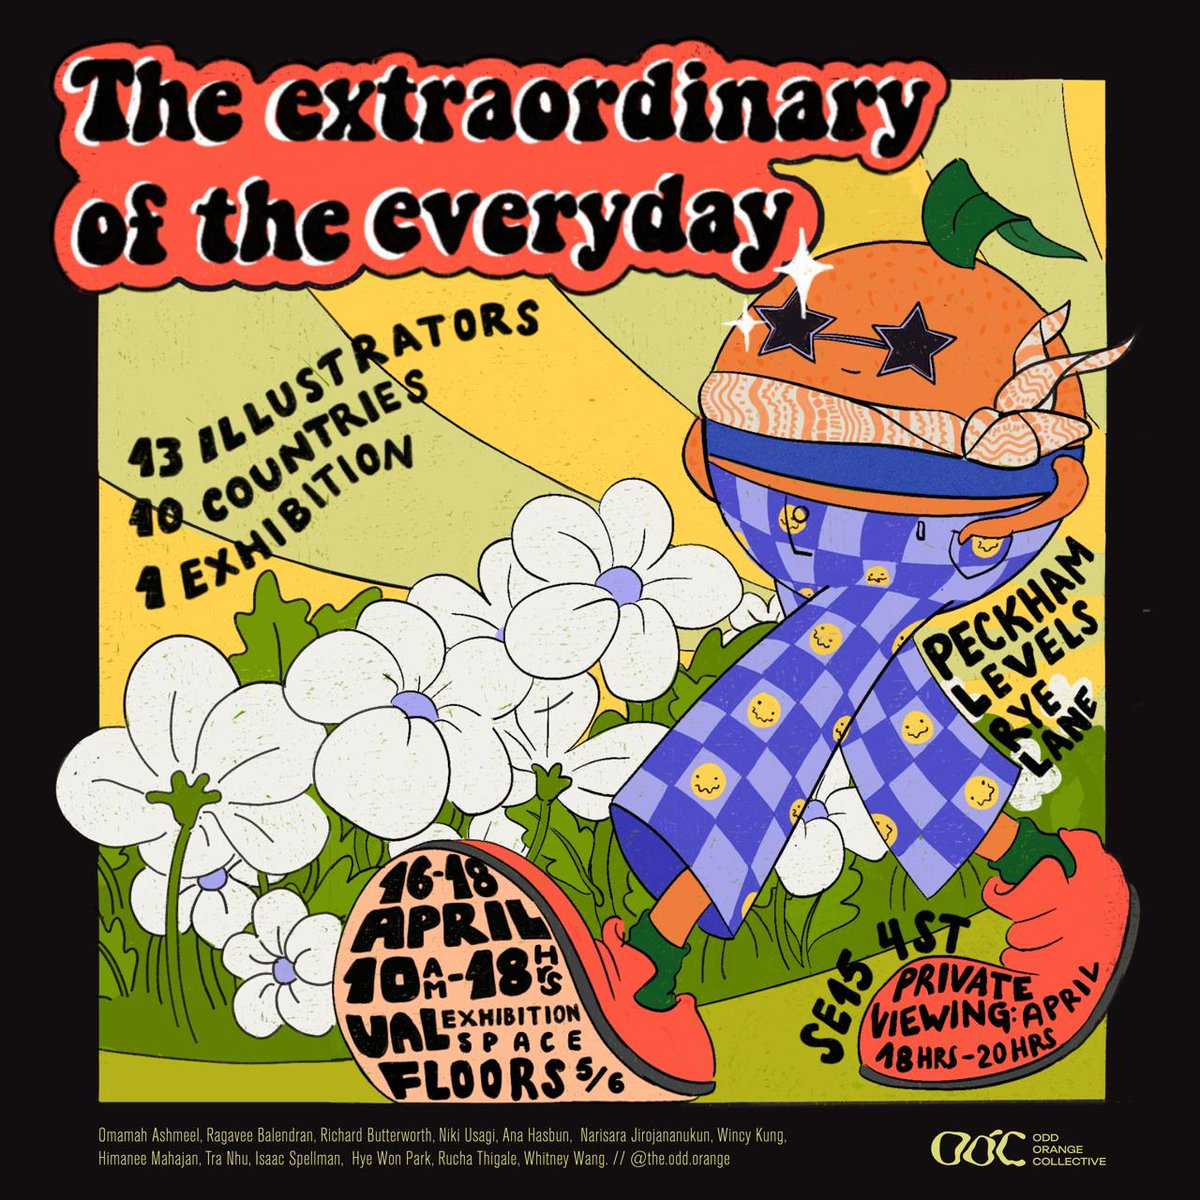 Tonight! Join MA Illustration for their exhibition | The Extraordinary of the Everyday 📆 16 – 18 April Private View: 16 April, 6 – 8pm 📍 UAL Exhibition Space, Floor 5/6, Peckham Levels, Rye Lane, London, SE15 4ST Free tickets ➡️ bit.ly/4aN47qY